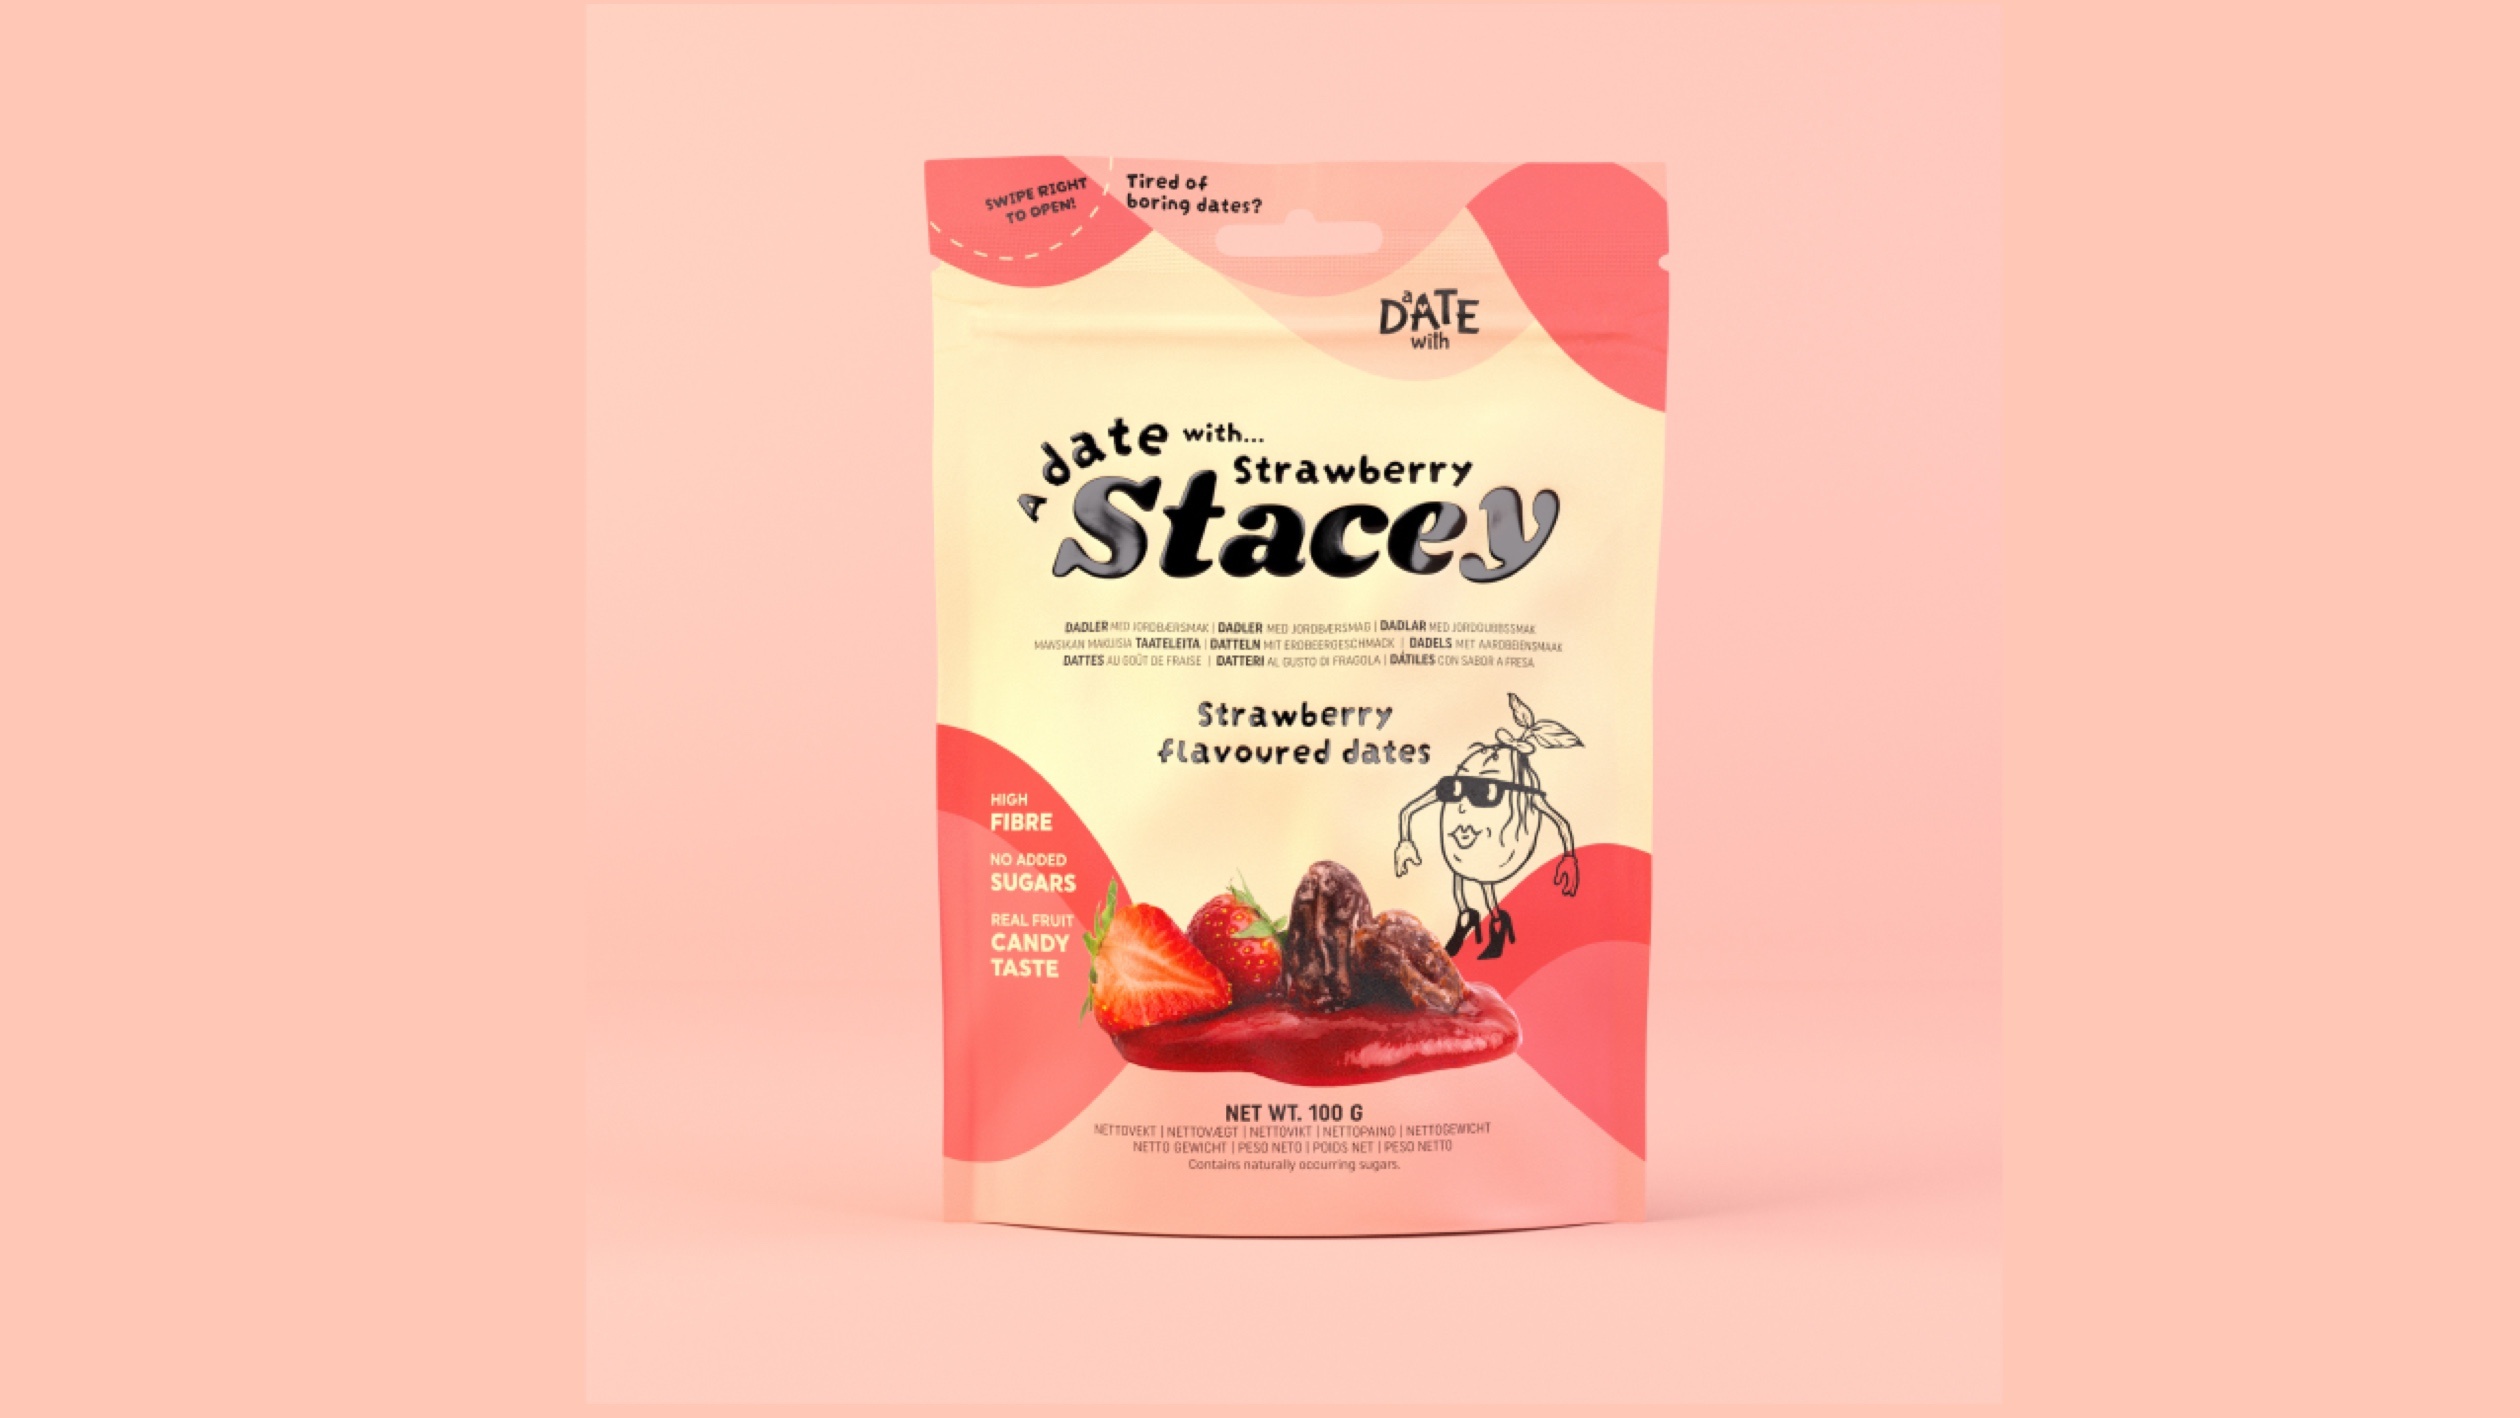 Strawberry Stacey